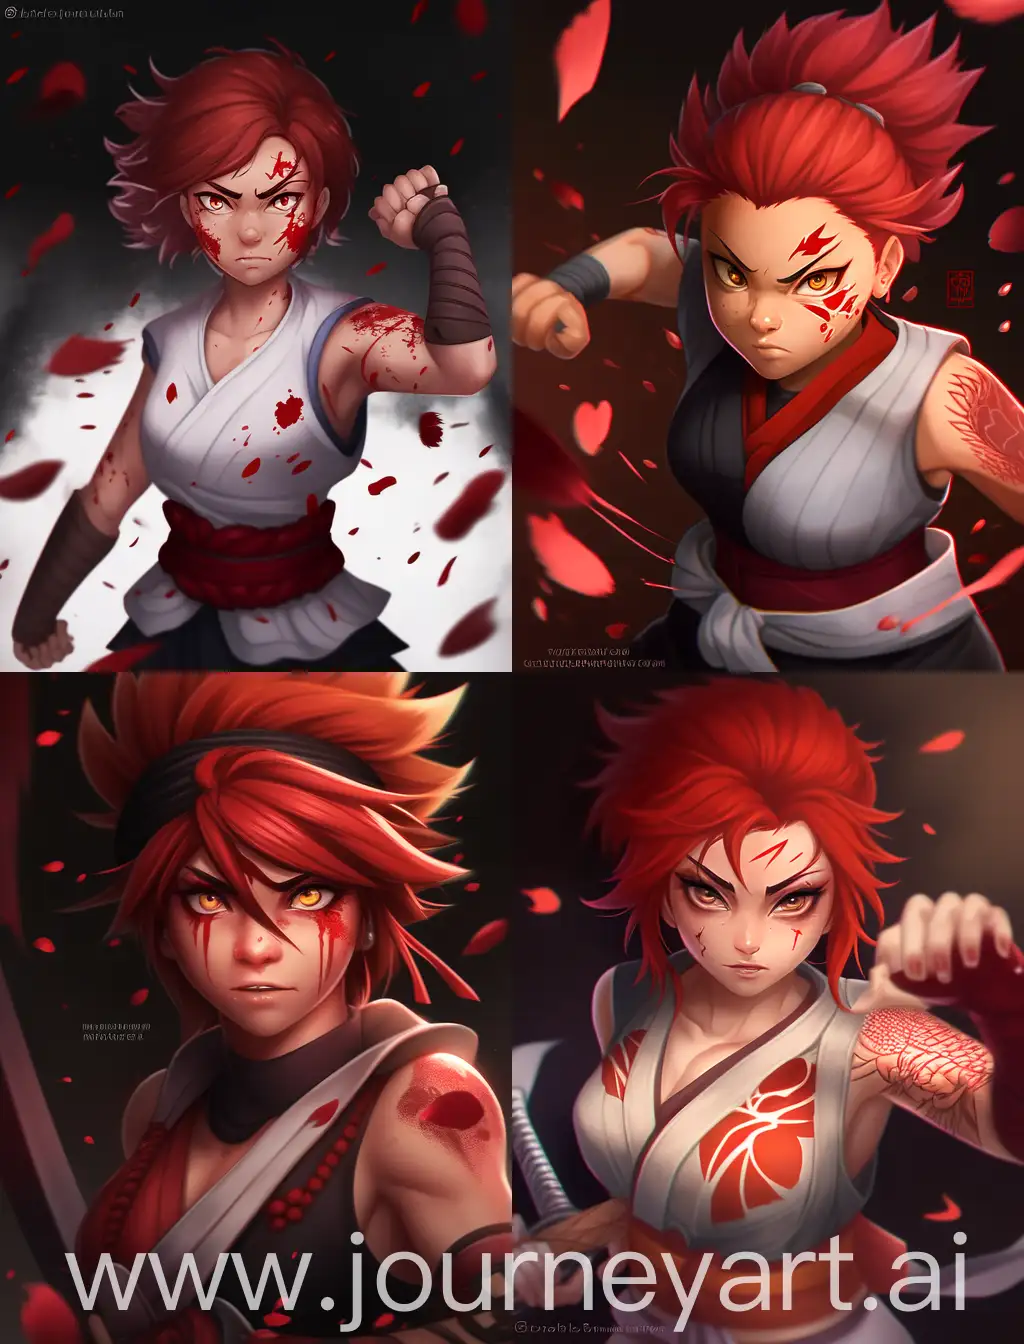 Fierce-Teenage-Samurai-Girl-with-Brown-Eyes-Blood-Splashes-and-Red-Hair-Tattooed-Hands